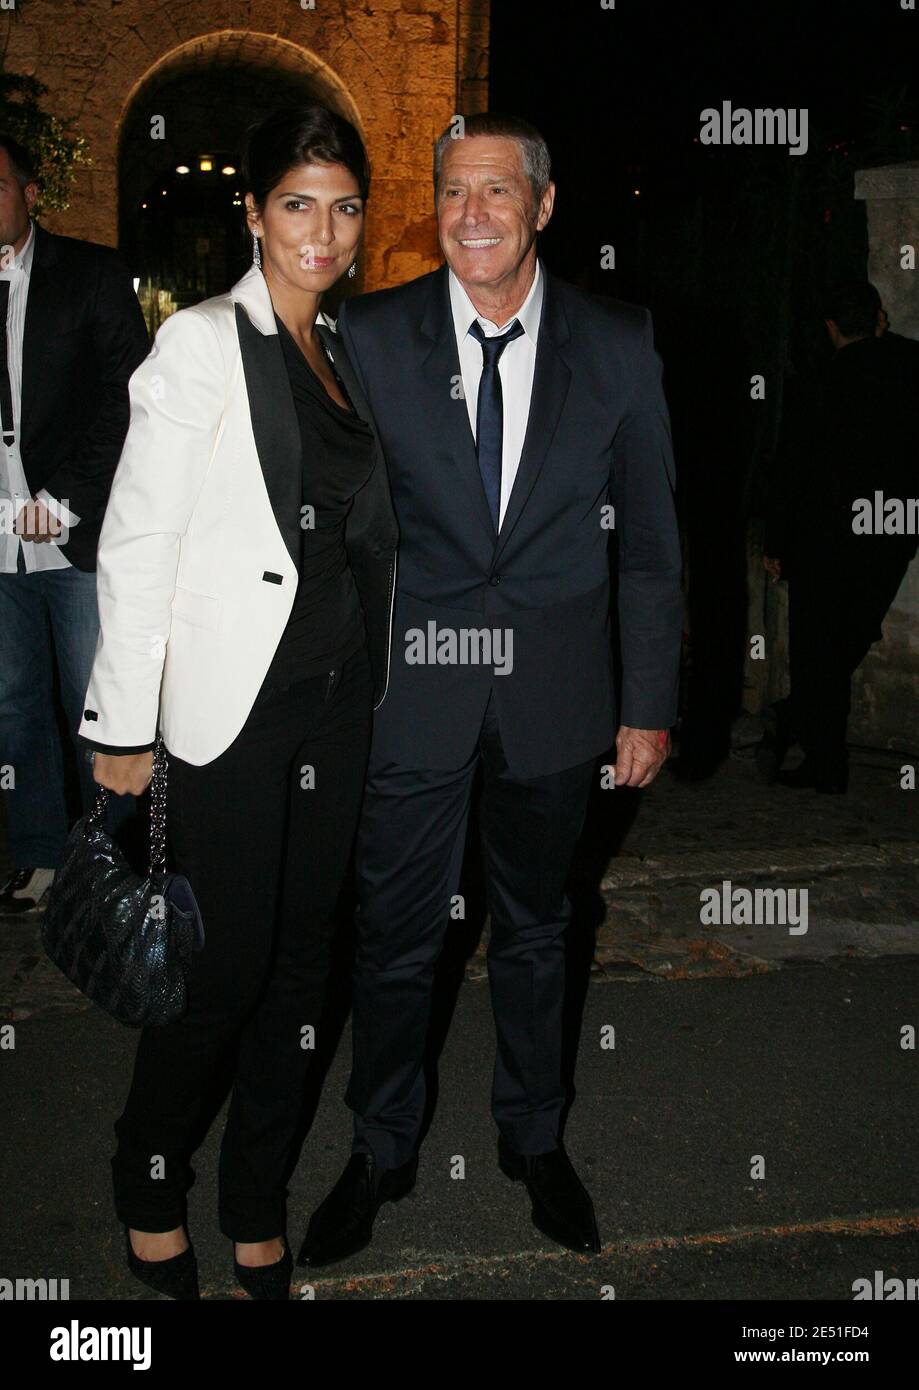 Jean-Claude Darmon and his wife attend the Canal Plus channel party during  61st Cannes Film Festival in Cannes, France on May 16, 2008. Photo by Denis  Guignebourg/ABACAPRESS.COM Stock Photo - Alamy